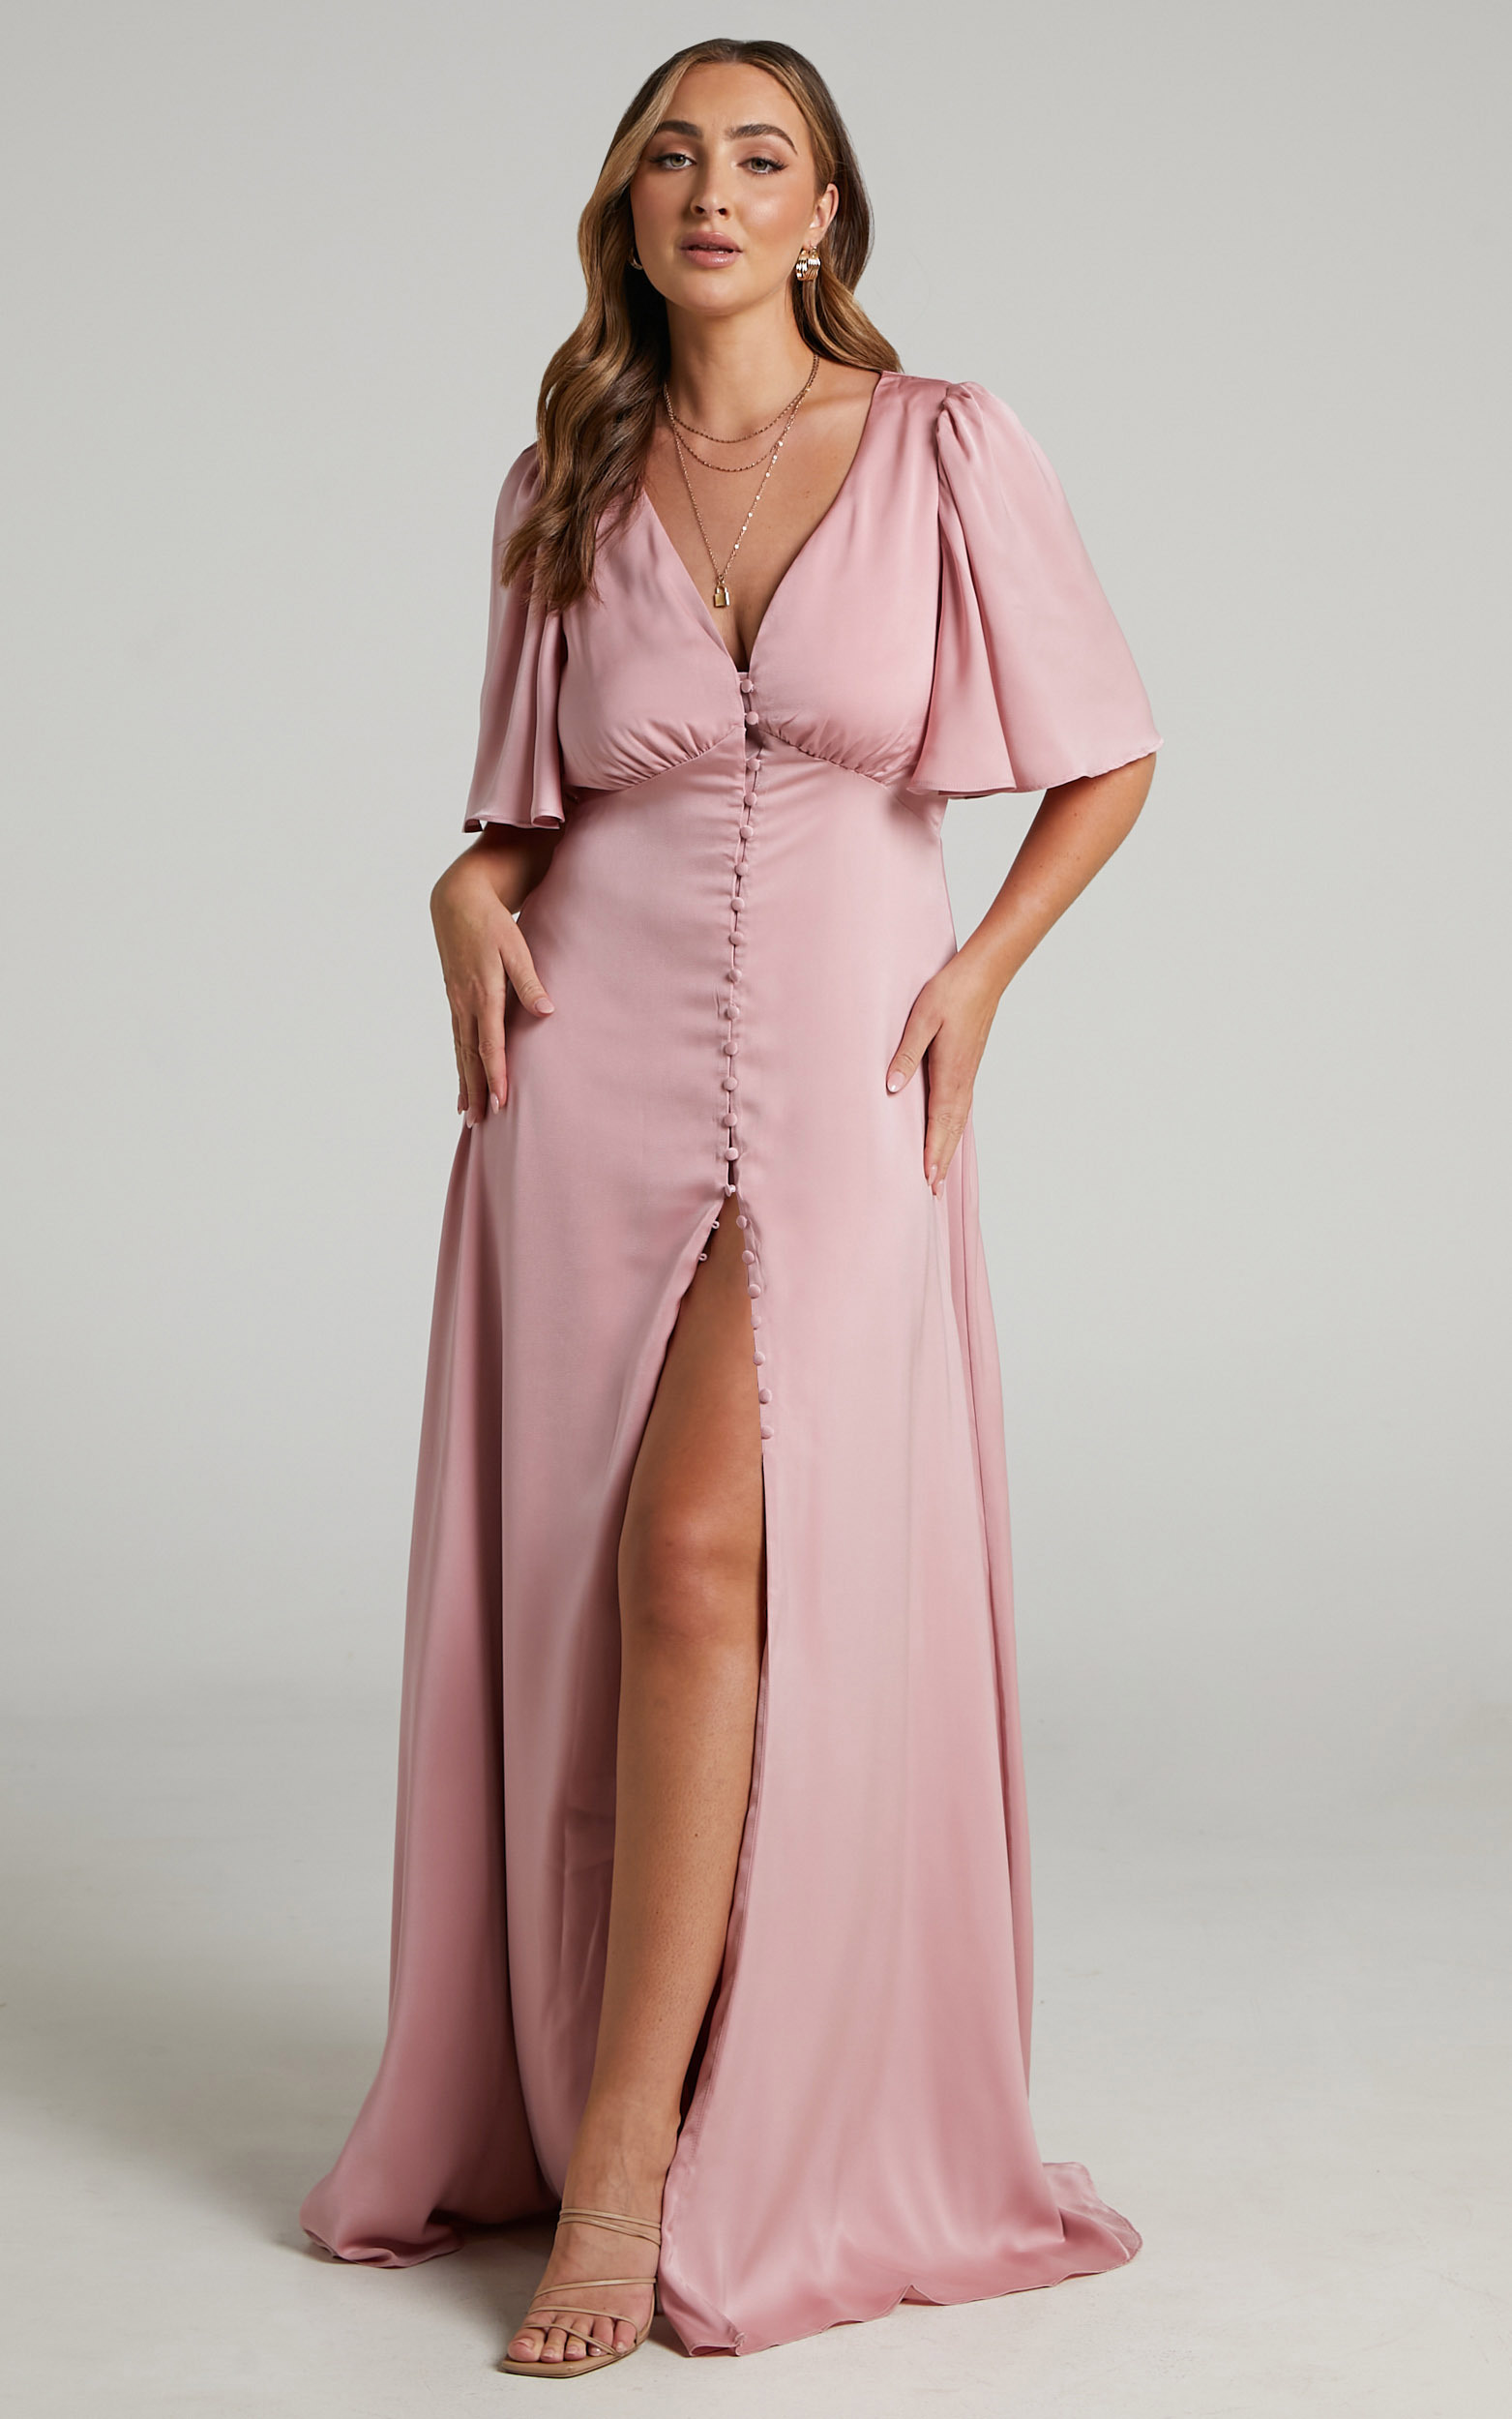 Maryam Maxi Dress - Button Front Flutter Sleeve Dress in Dusty Pink - 04, PNK1, hi-res image number null